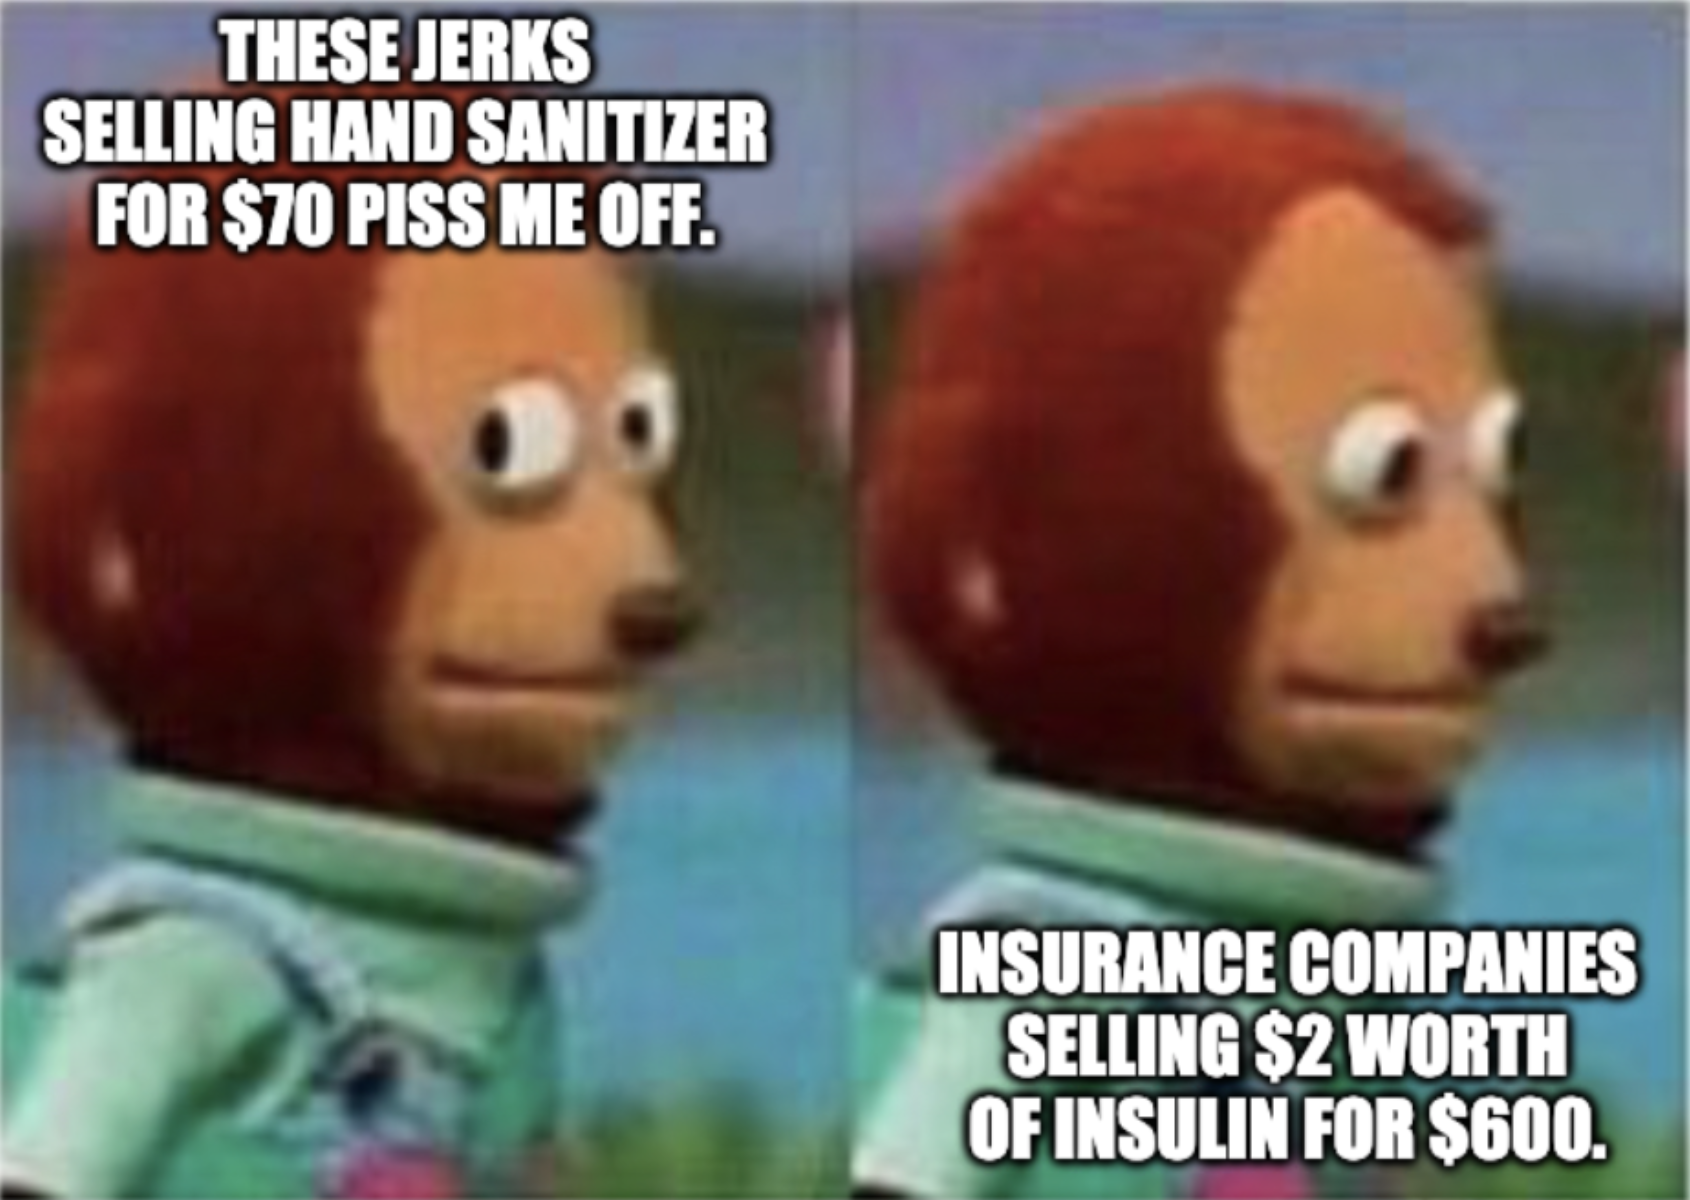 american colonial meme reddit - These Jerks Selling Hand Sanitizer For $70 Piss Me Off. Insurance Companies Selling $2 Worth Of Insulin For $600.